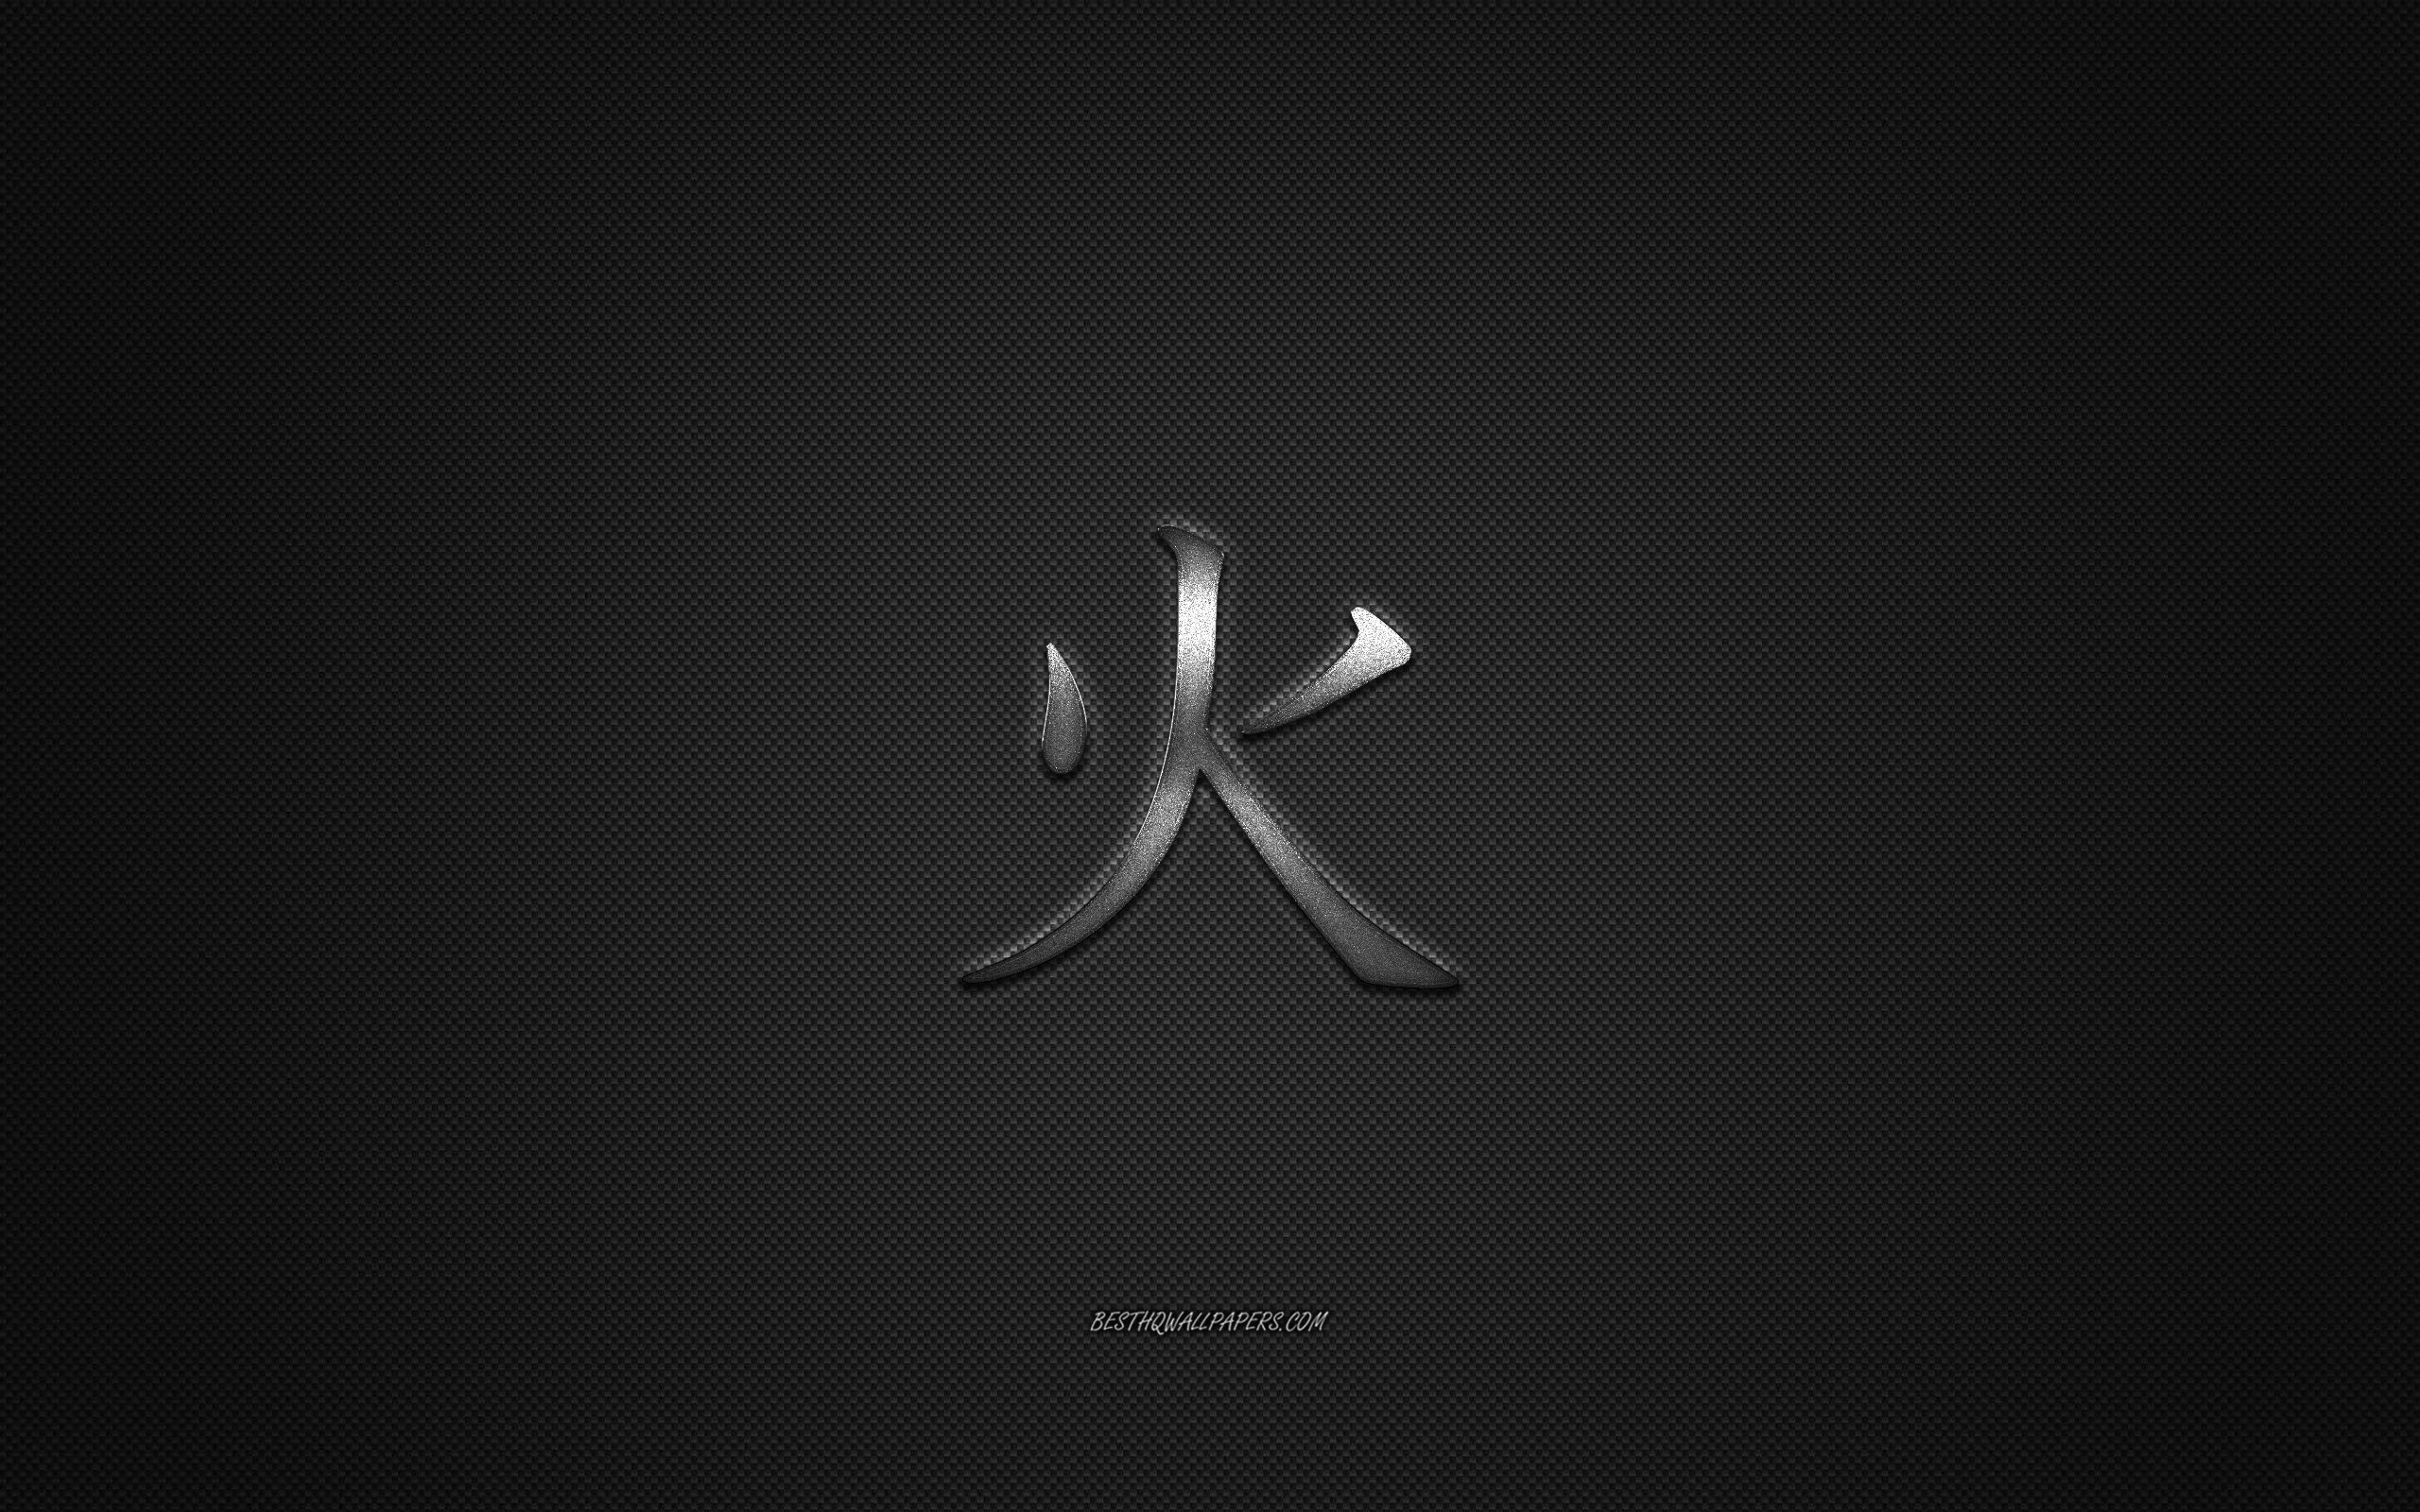 Download wallpaper Fire Japanese character, metal character, Fire Kanji Symbol, black carbon texture, Japanese Symbol for Fire, Japanese hieroglyphs, Fire, Kanji, Fire hieroglyph for desktop with resolution 2560x1600. High Quality HD picture